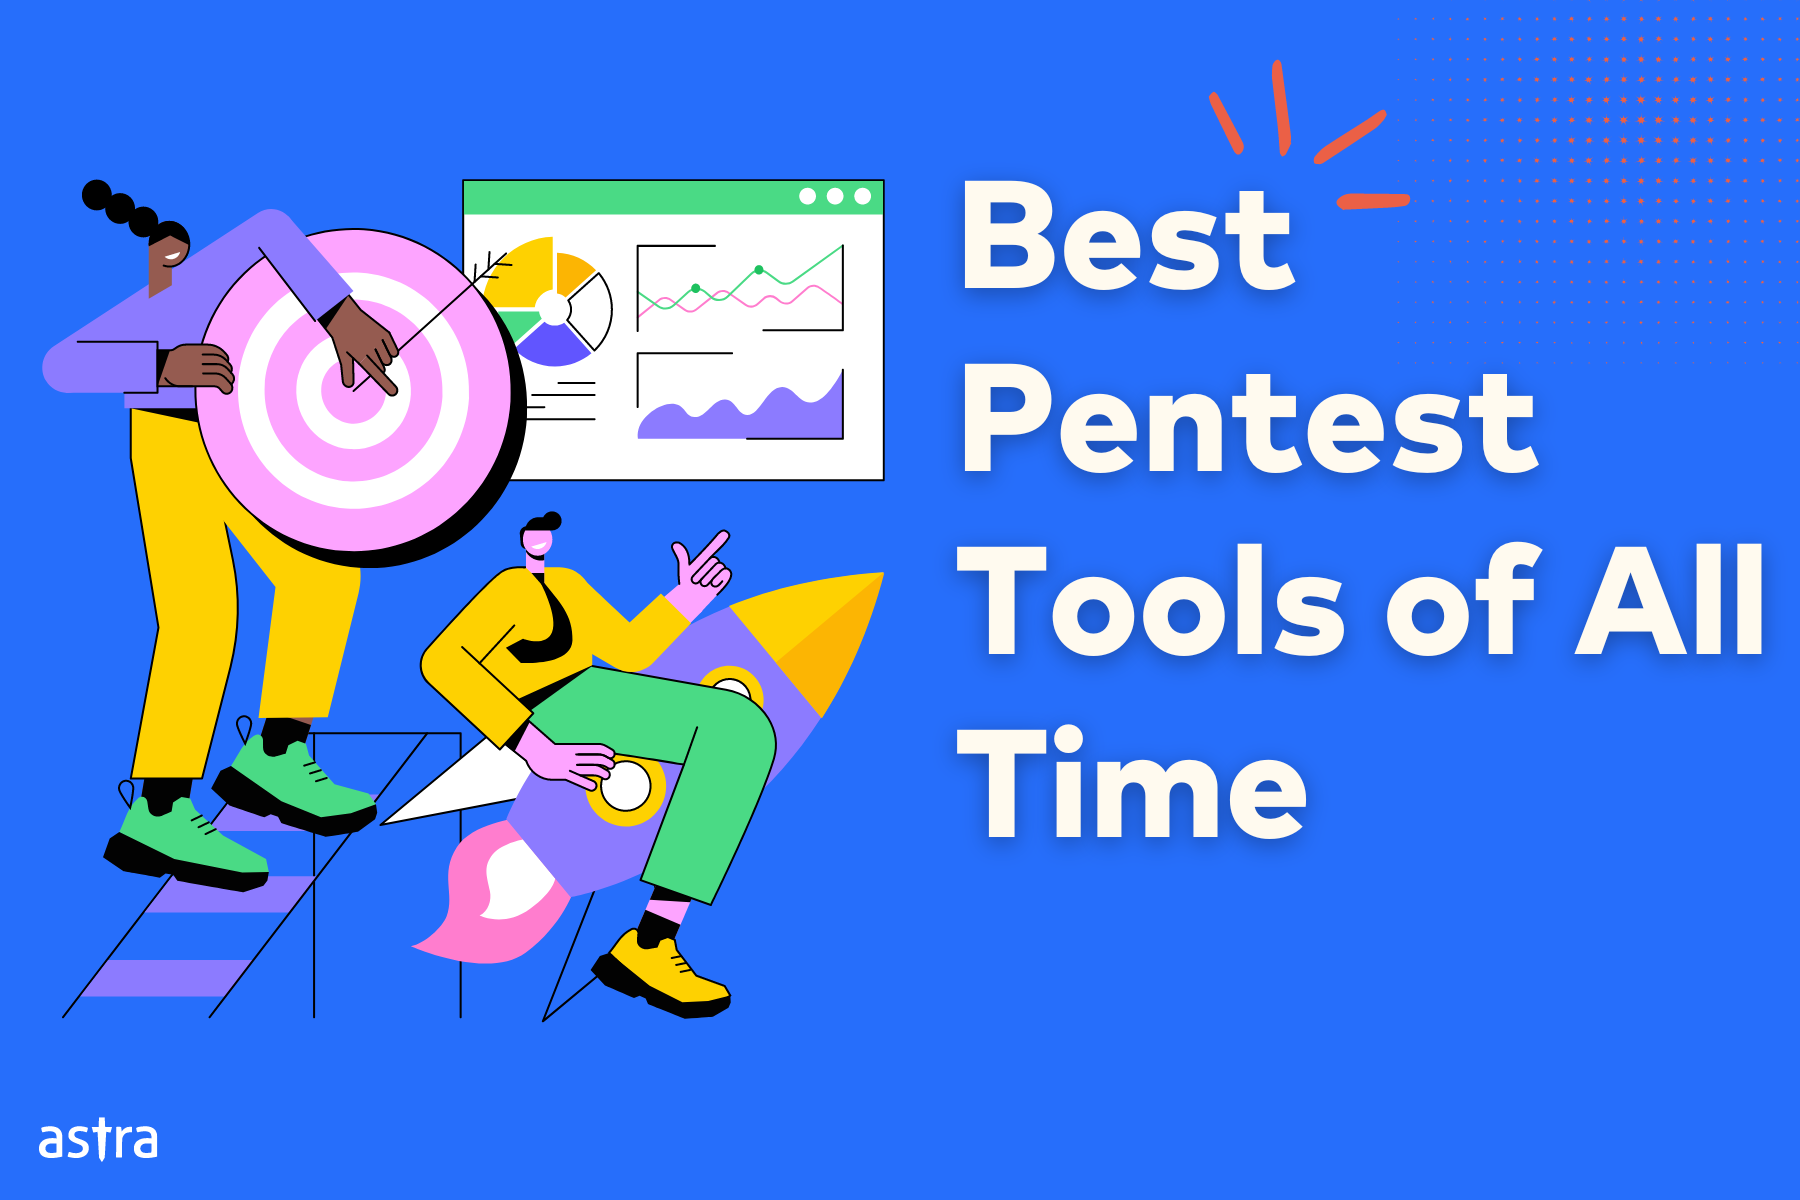 17 Most Popular Penetration Testing Tools for Companies and Pentesters